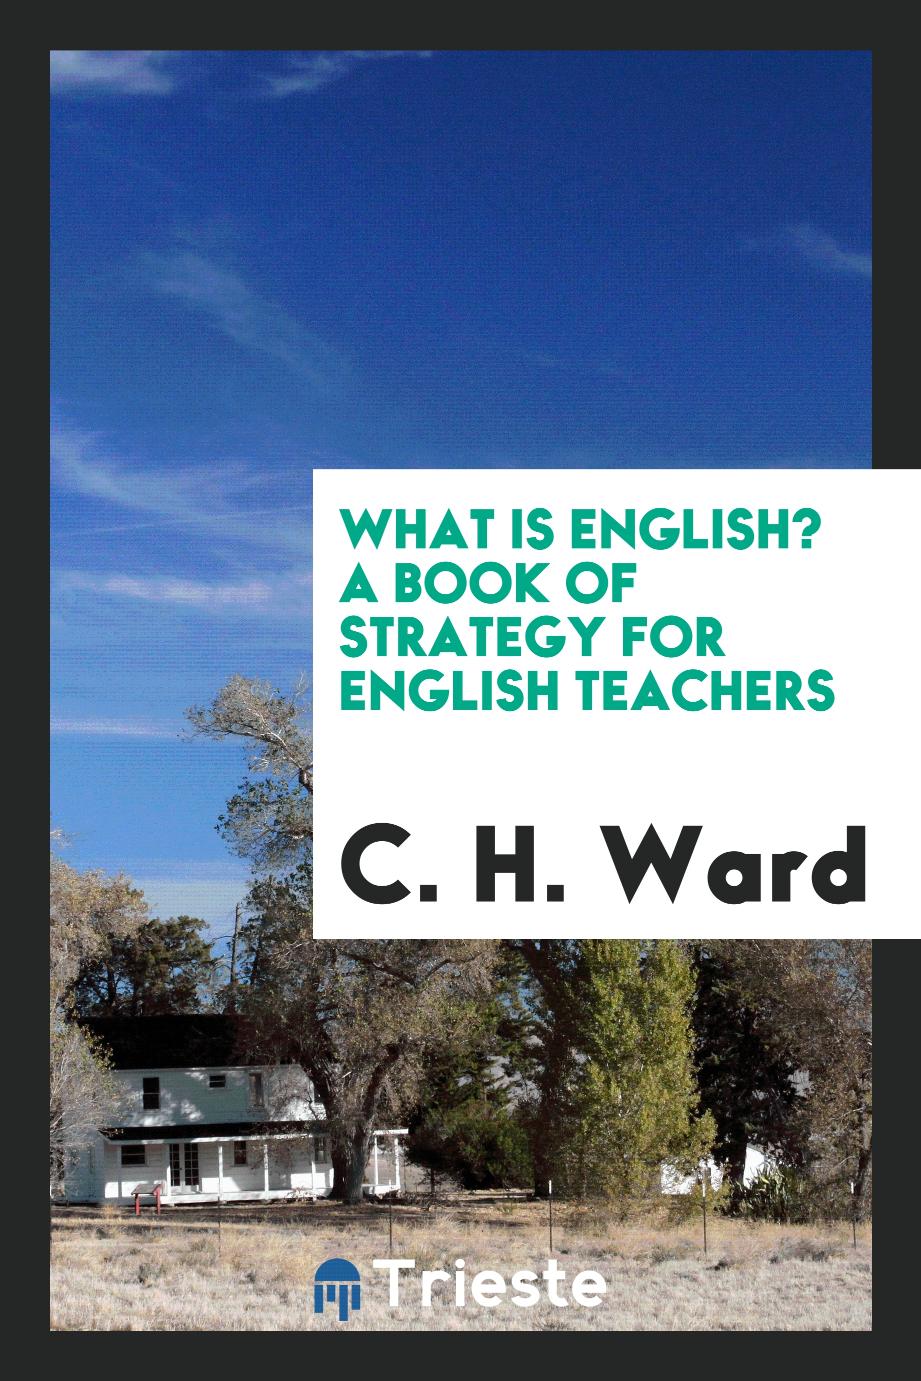 What is English? A book of strategy for English teachers